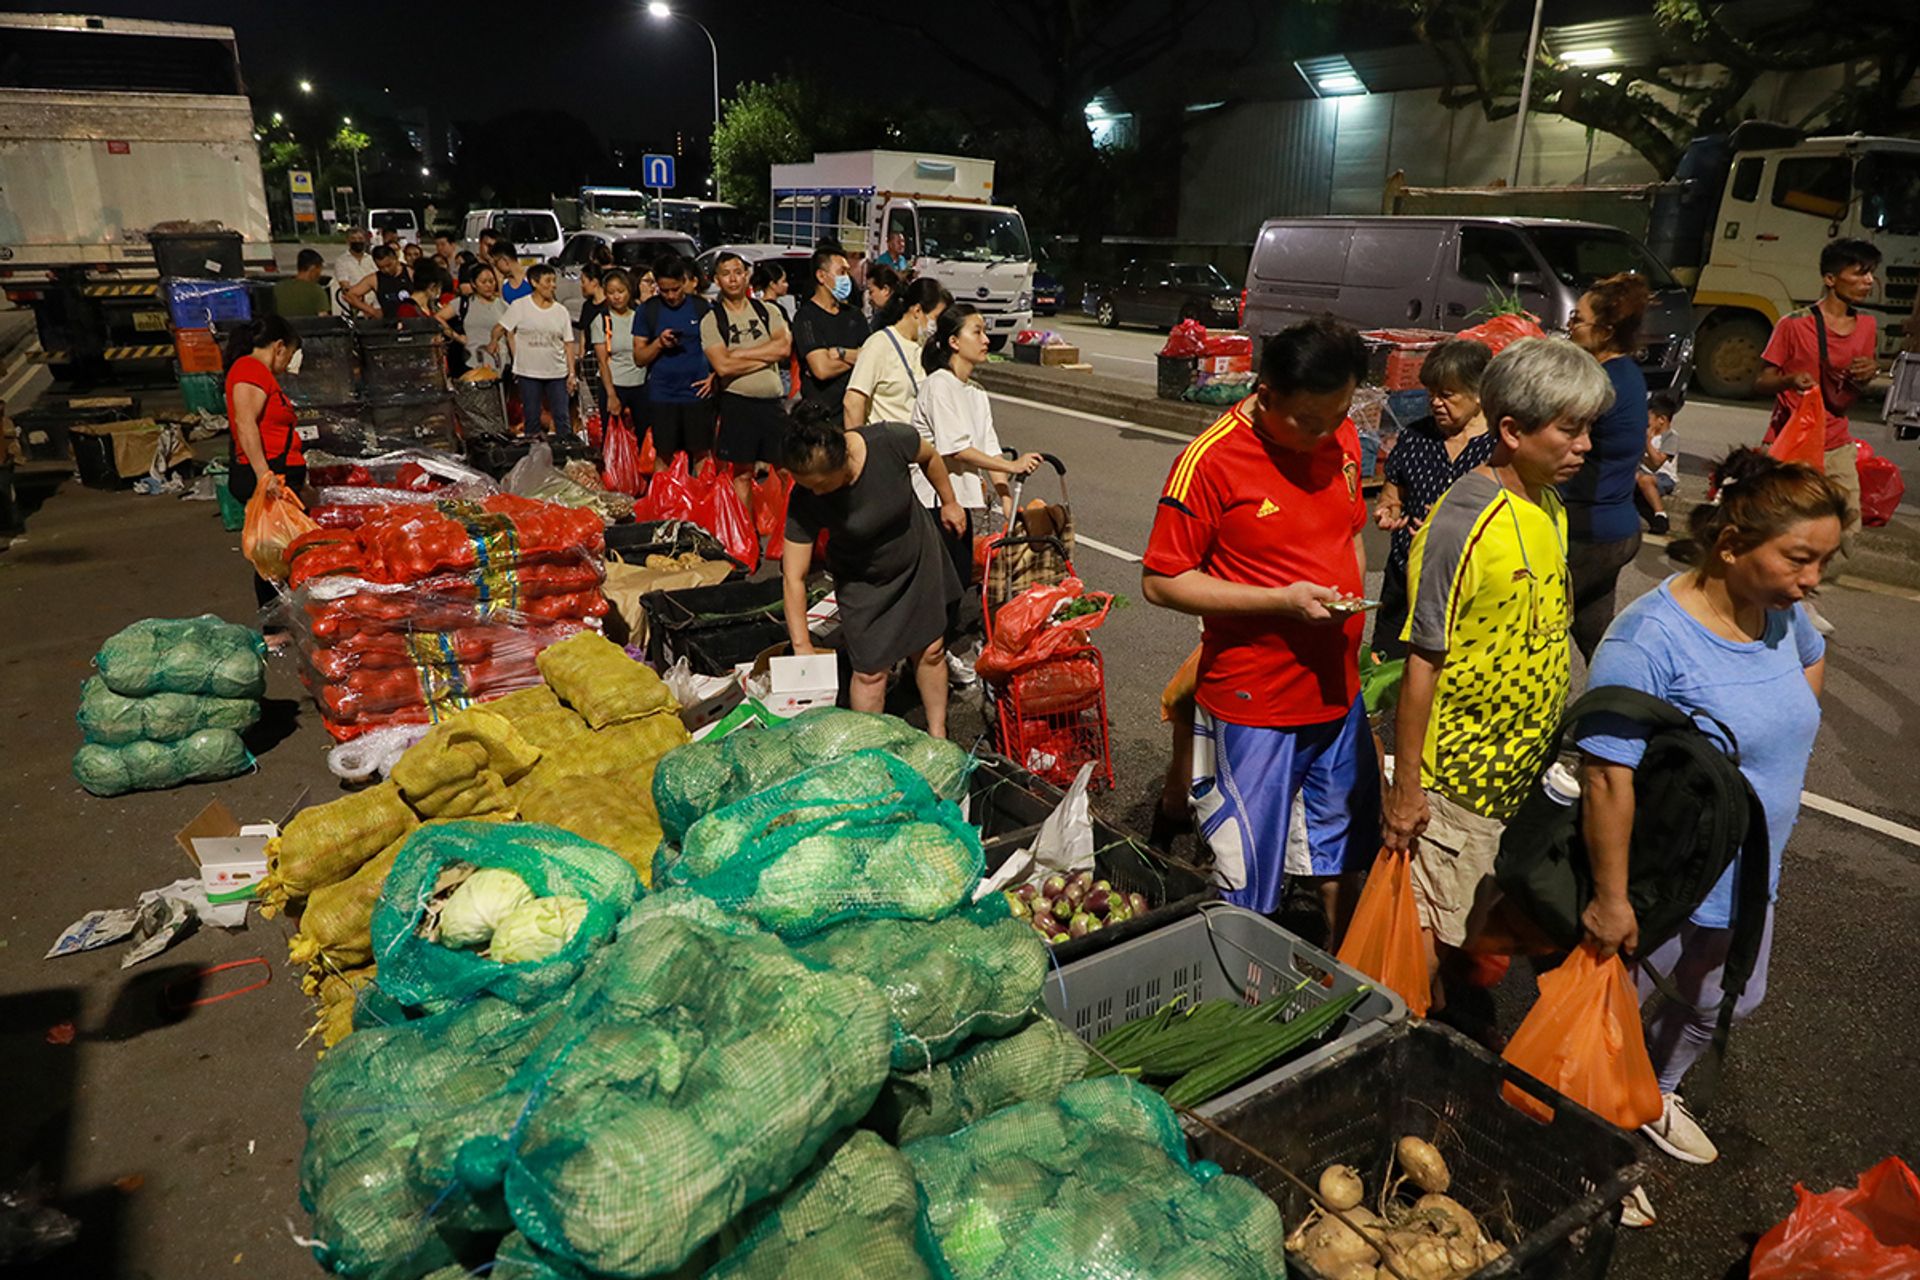 Some 200 types of fruits and vegetables are sold at the market every night. The produce comes mainly from Malaysia, Thailand, Vietnam, and China, although some Korean strawberries and Australian pumpkins are known to make a seasonal appearance.